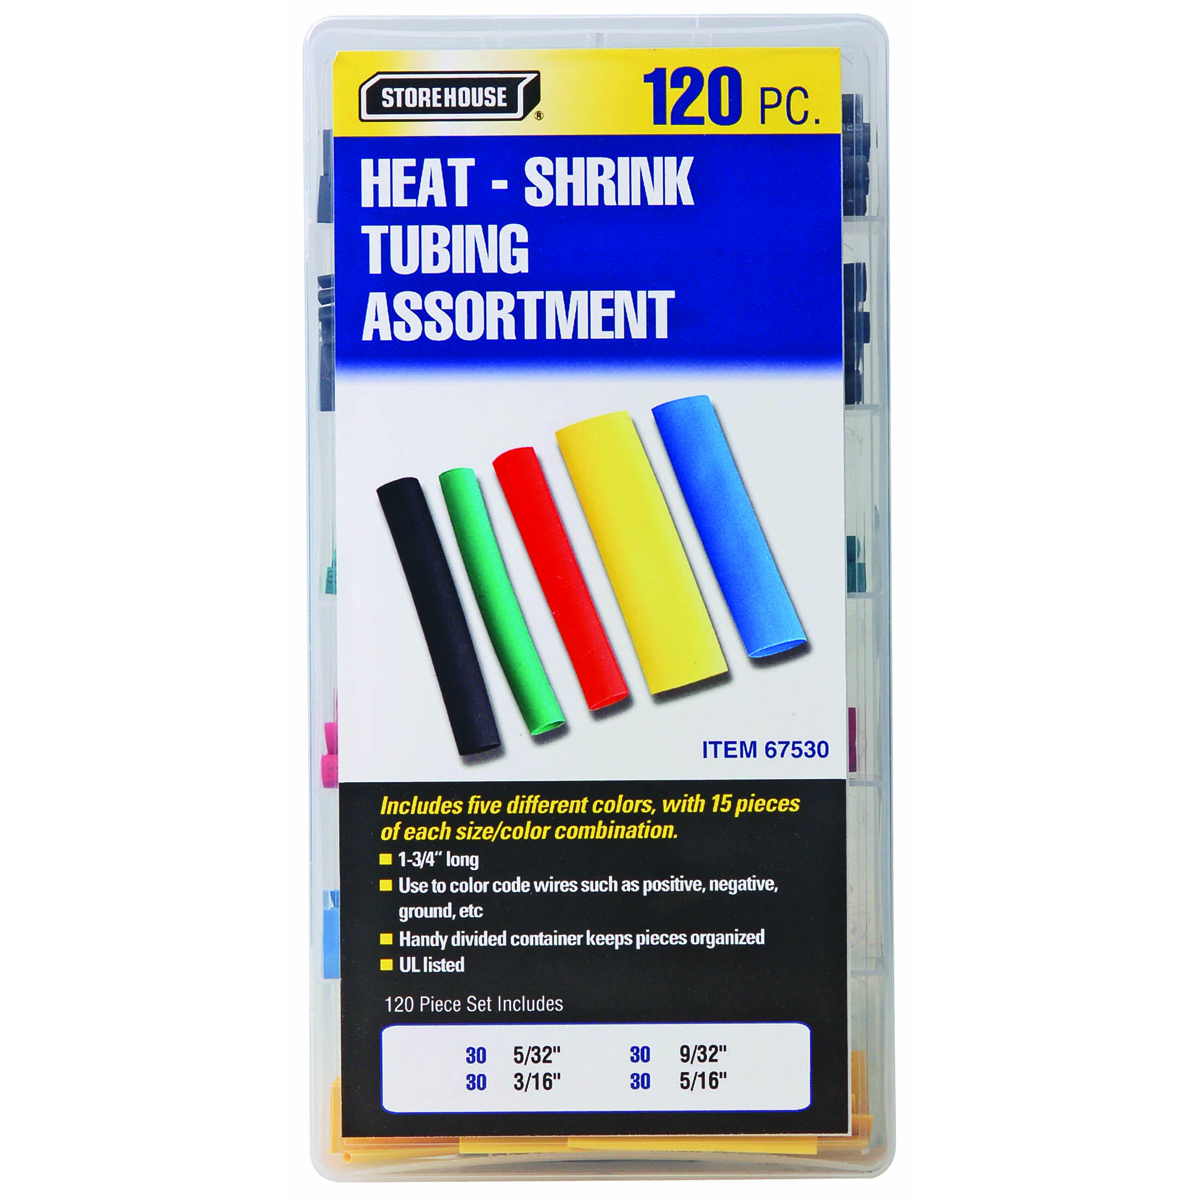 STOREHOUSE Heat-Shrink Tubing Assortment with Case 120 Pc. - Item 67530